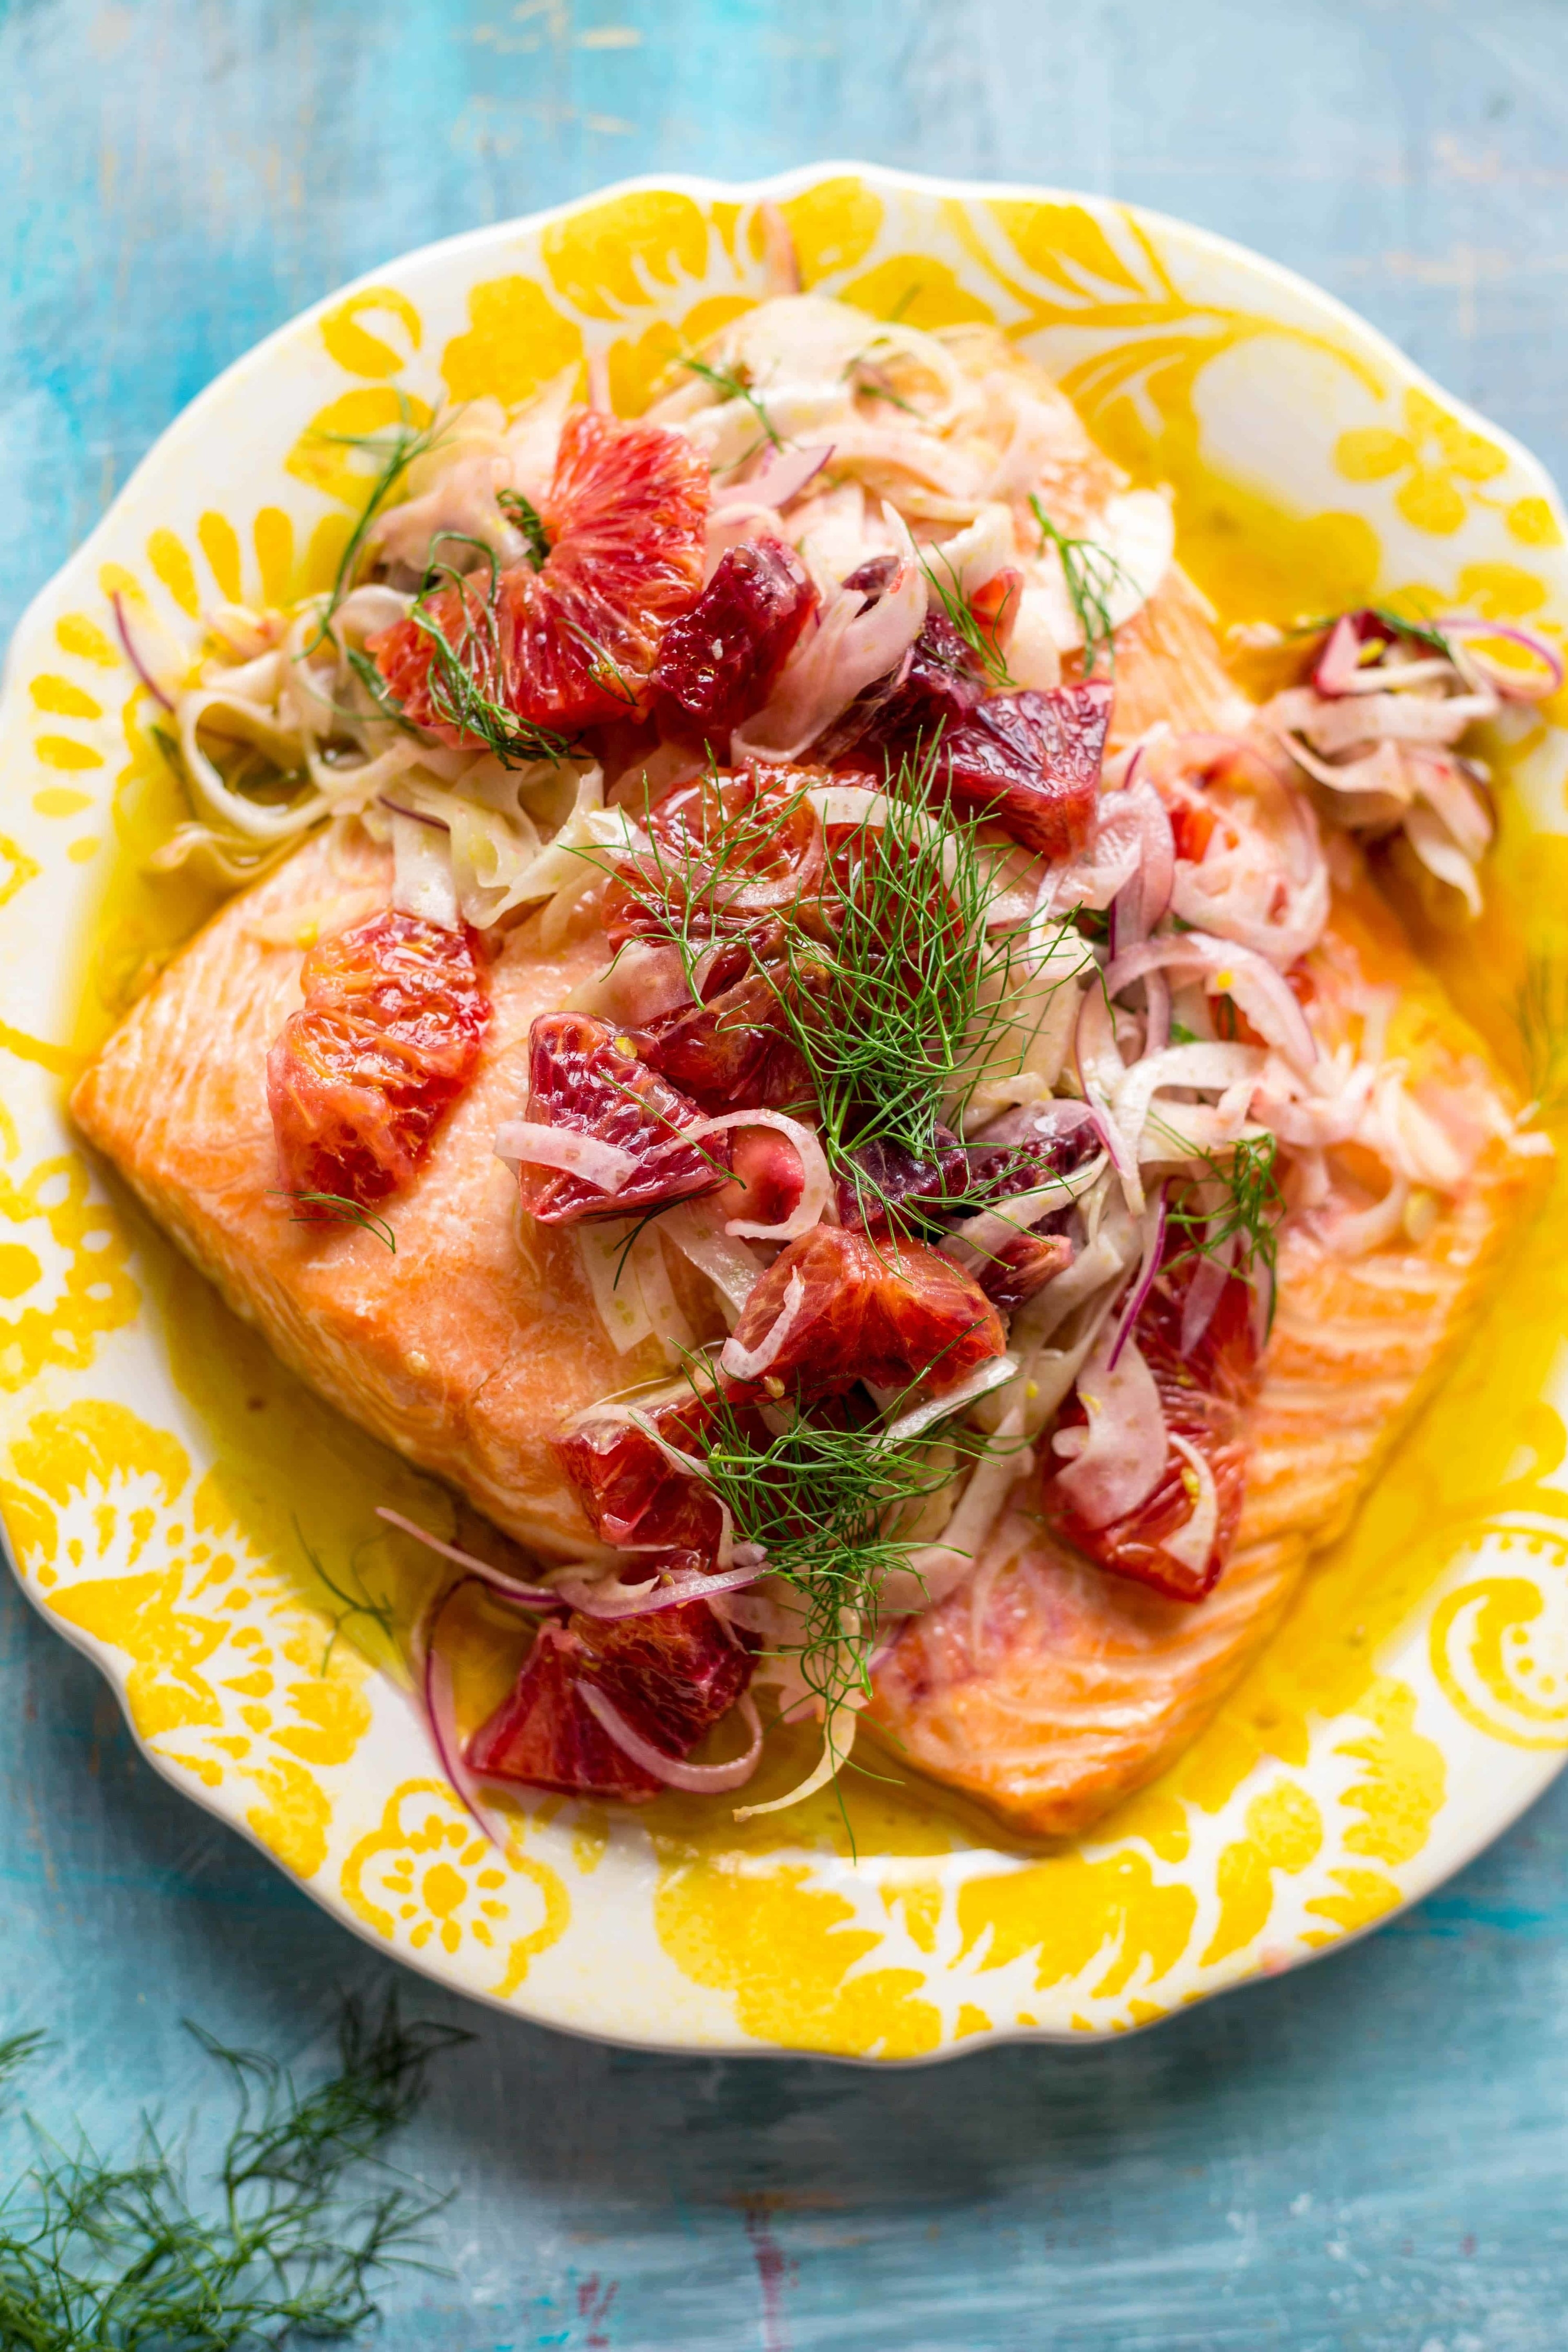 A plate of slow roasted salmon with blood orange and fennel fronds.